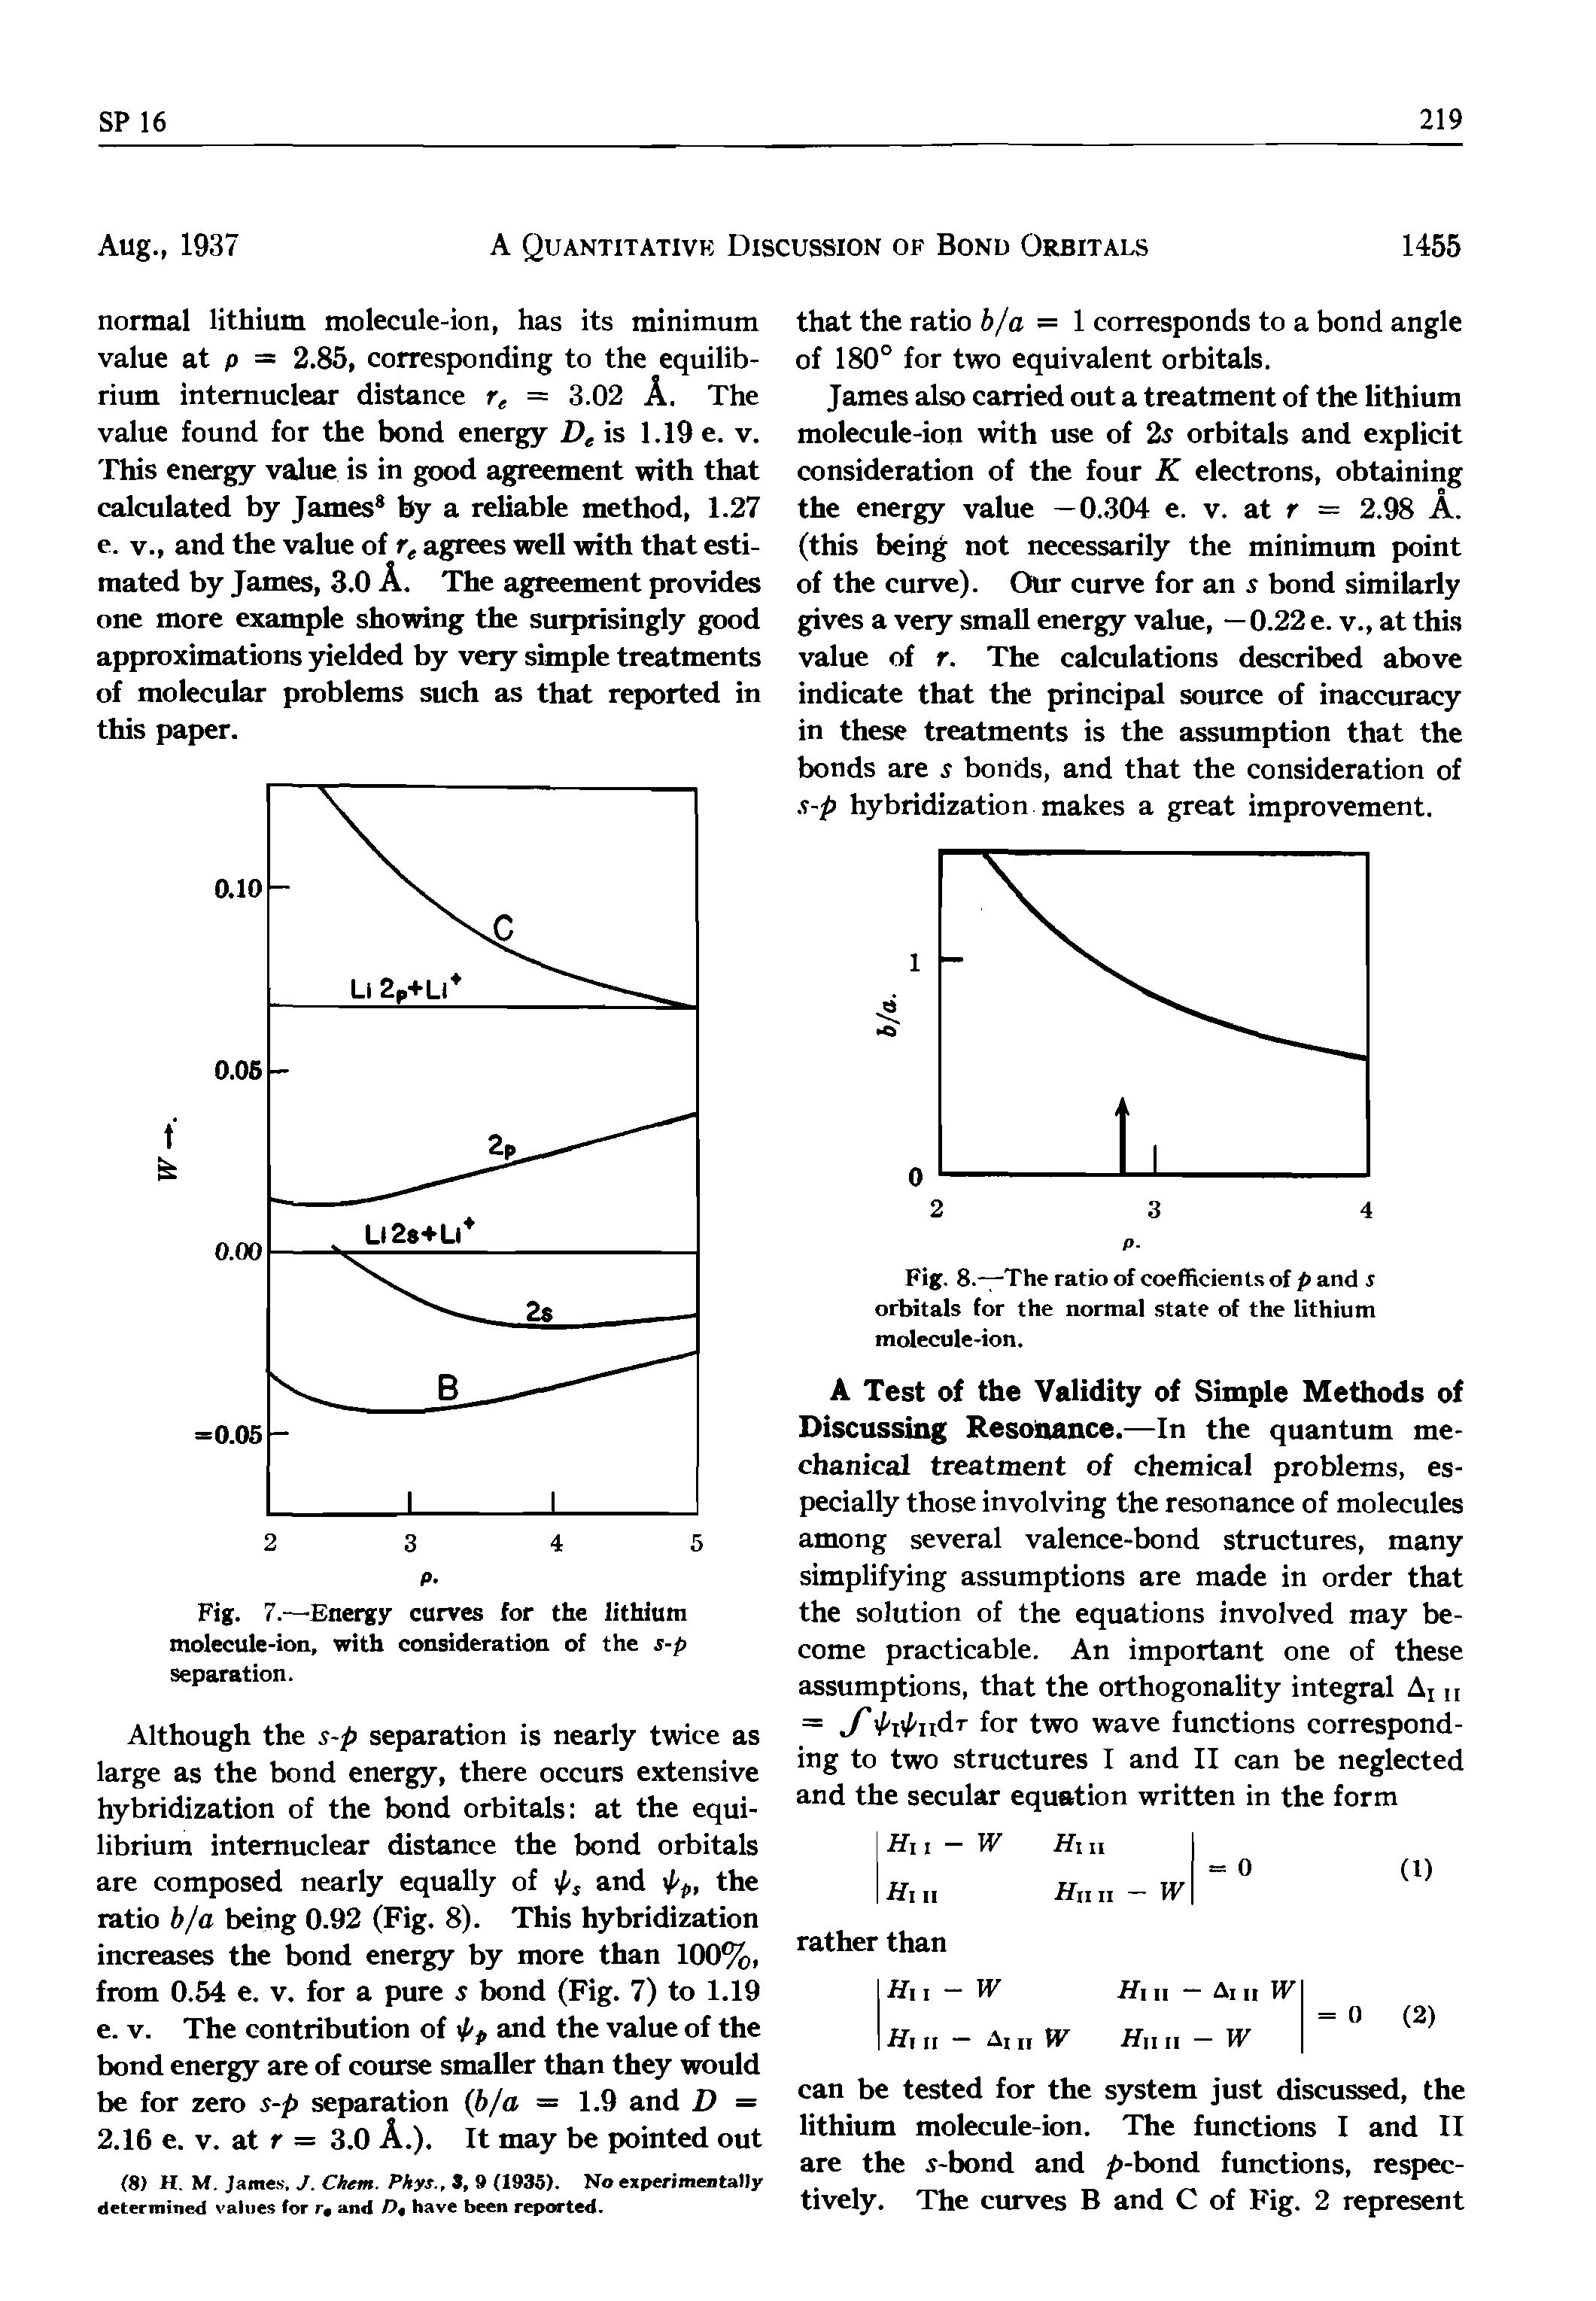 Fig. 7.—Energy curves for the lithium molecule-ion, with consideration of the s-p separation.